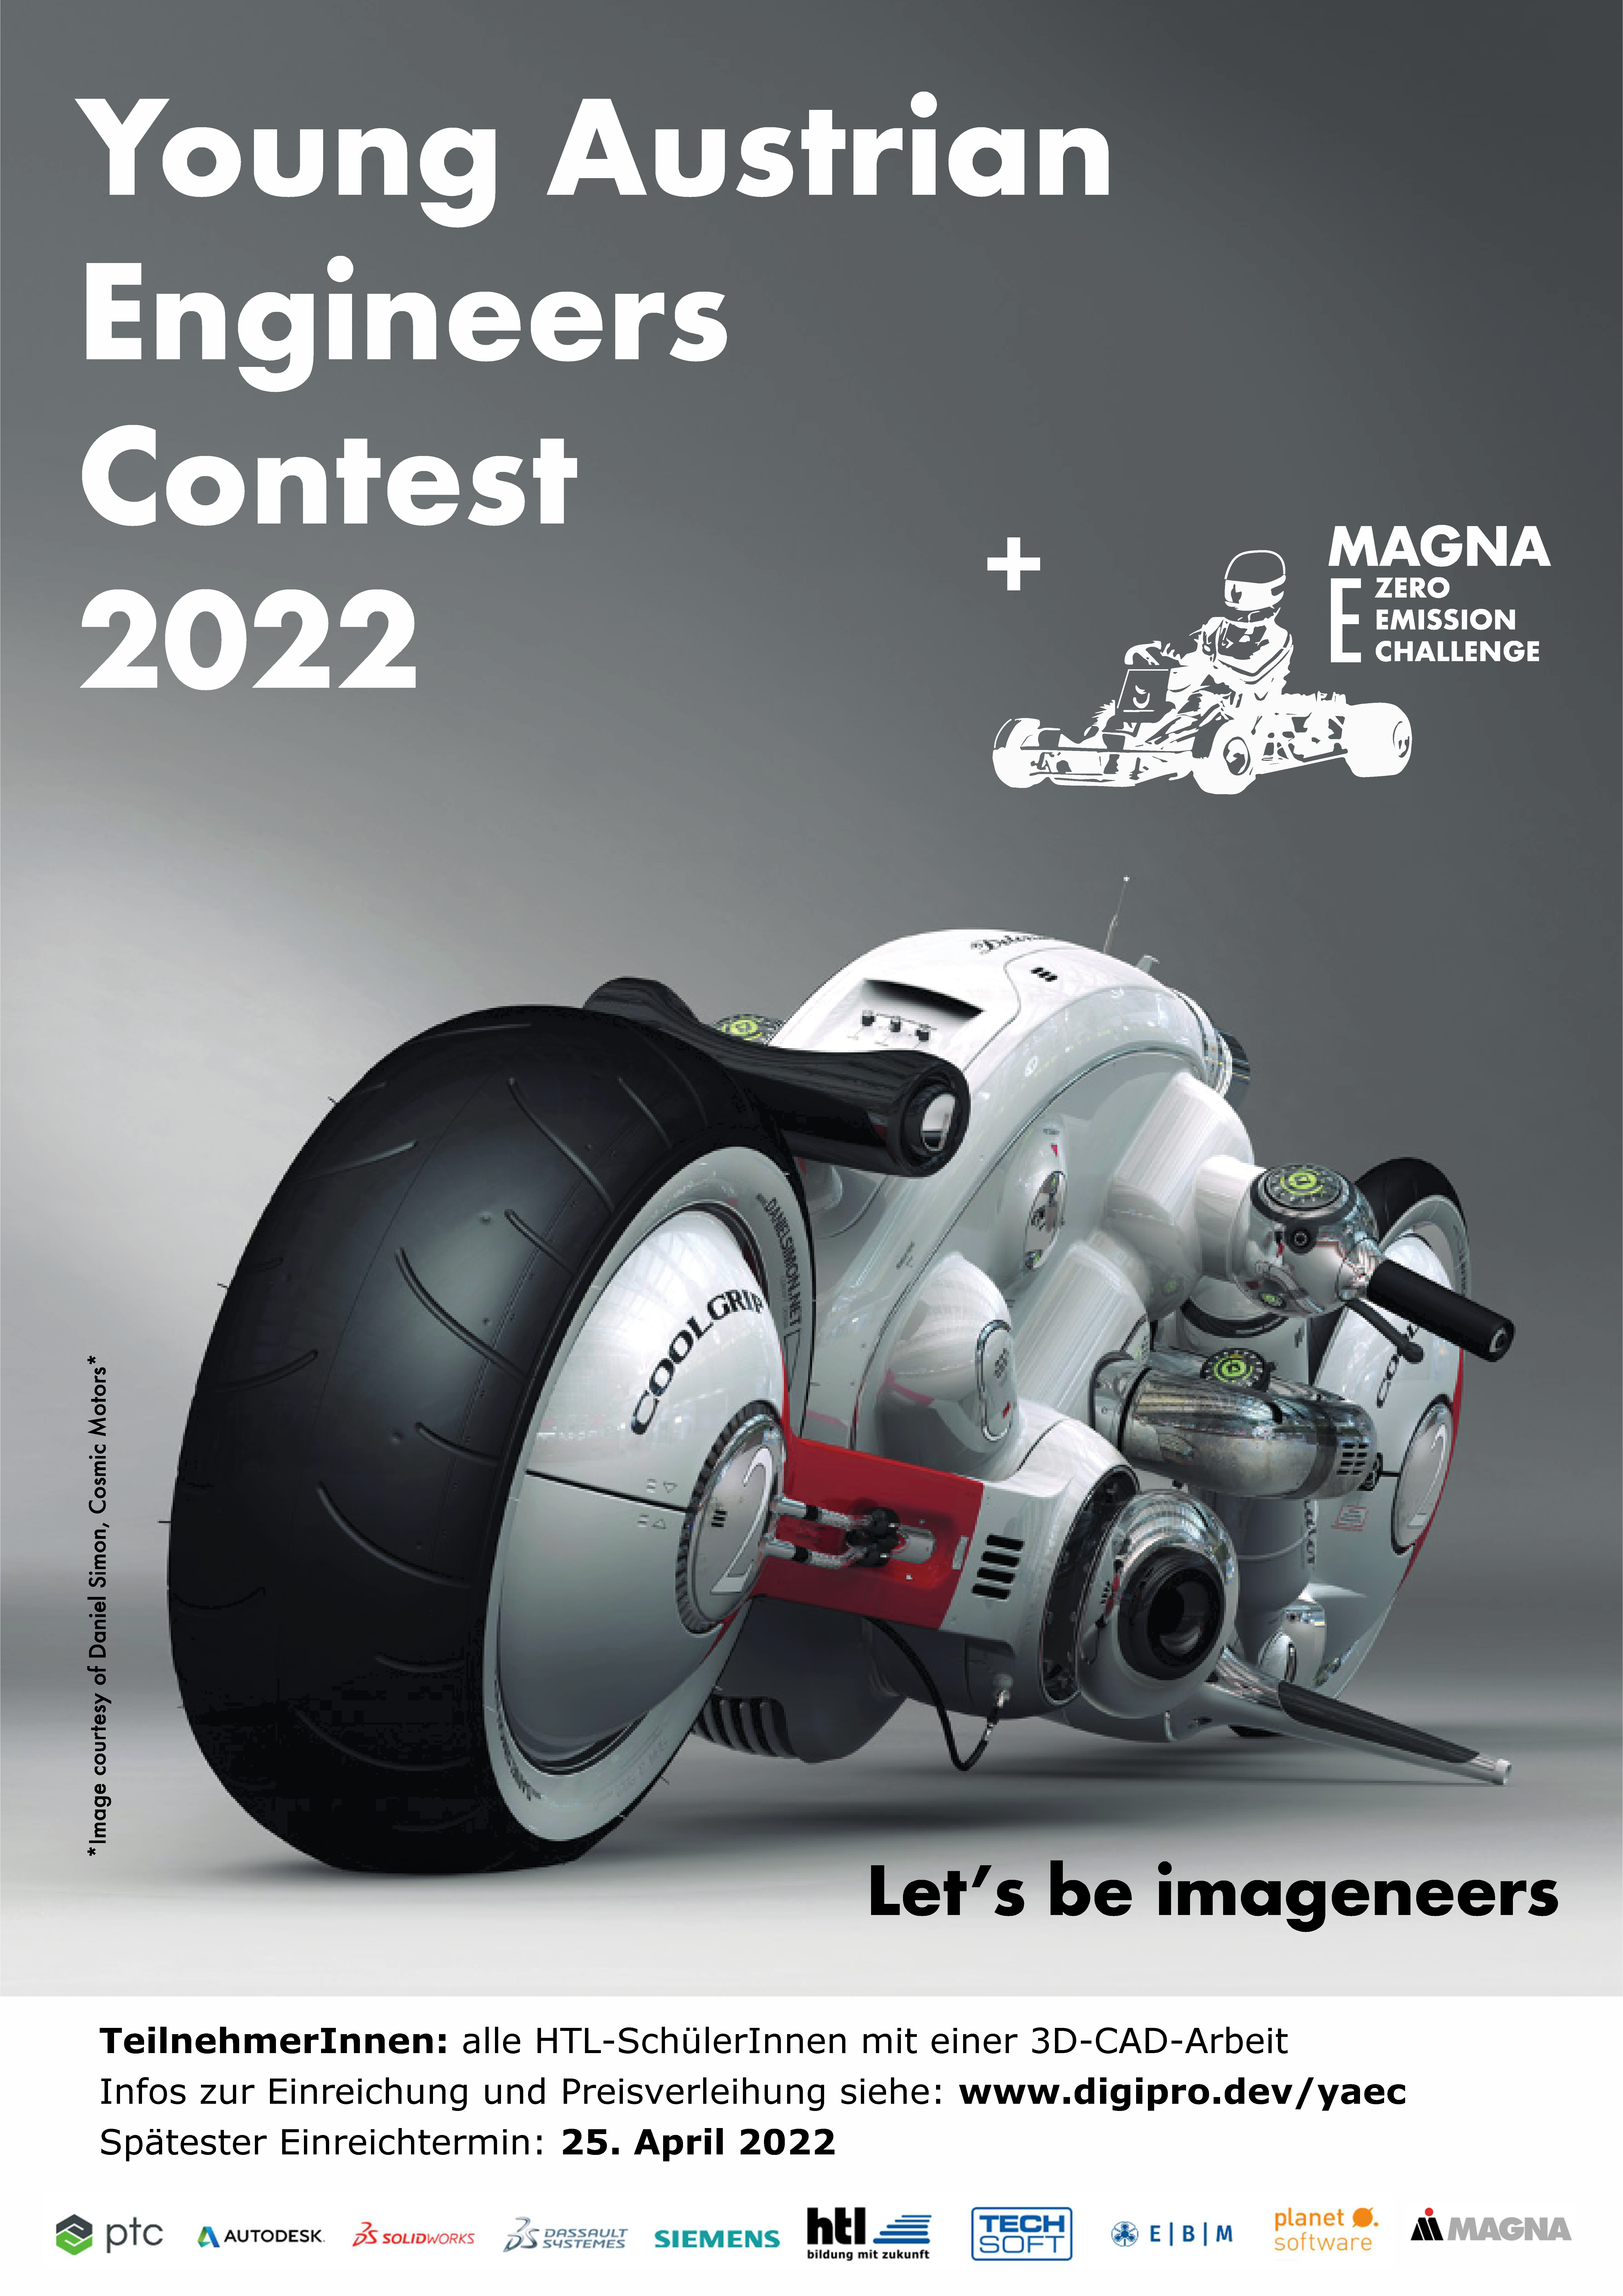 Young Austrian Engineers Contest 2022